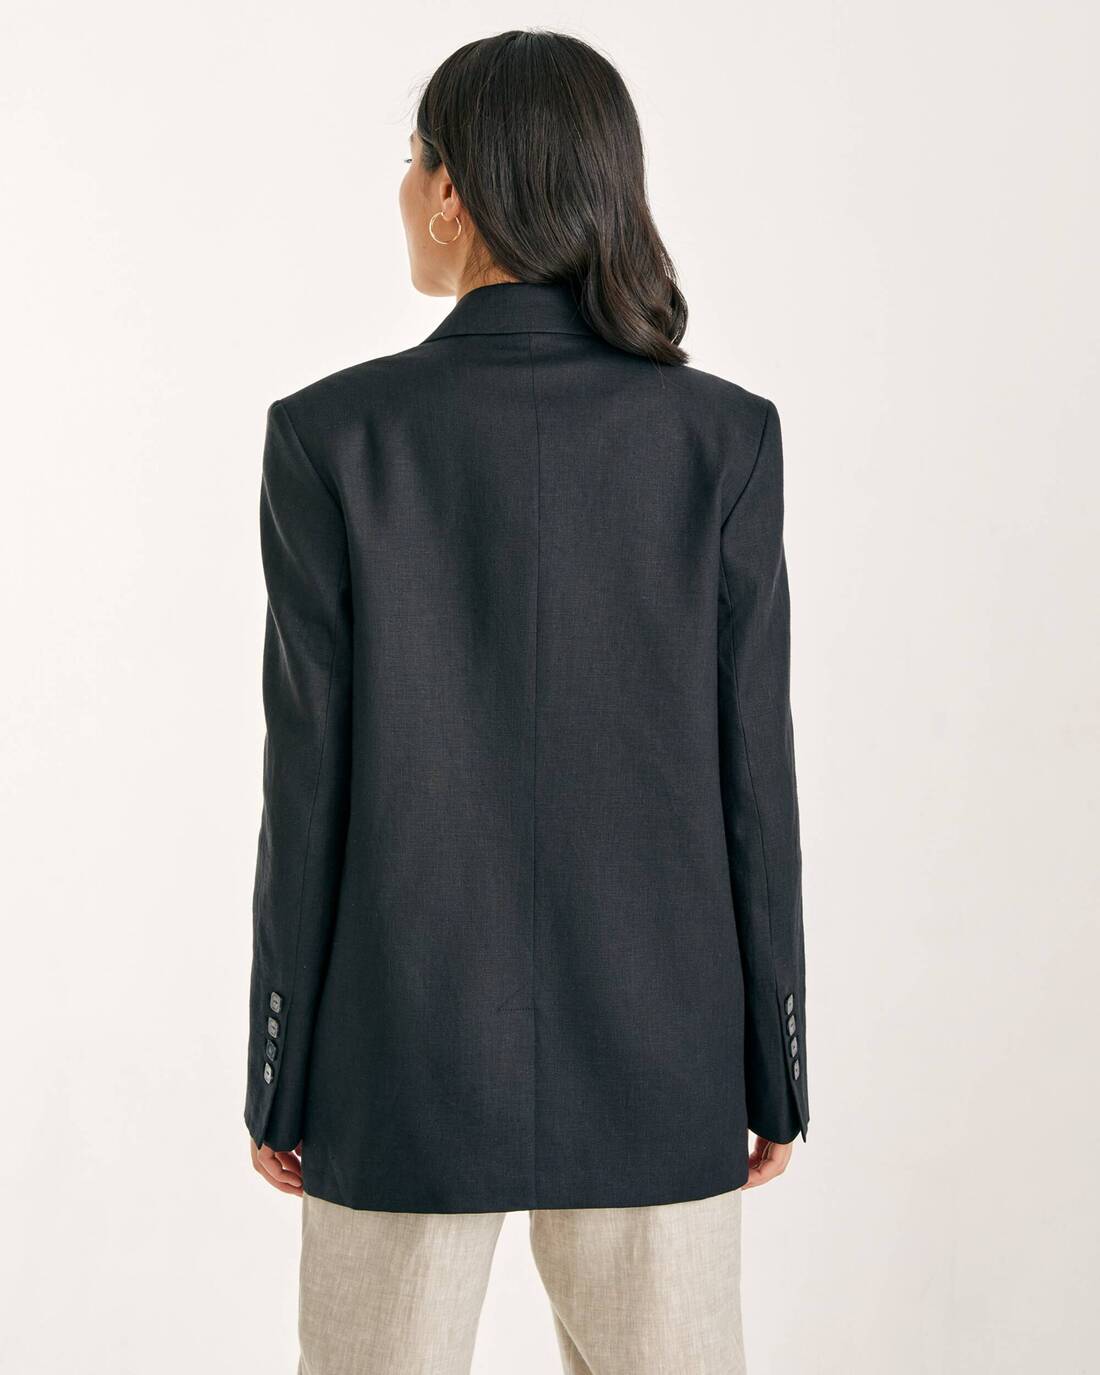 Linen double-breasted jacket